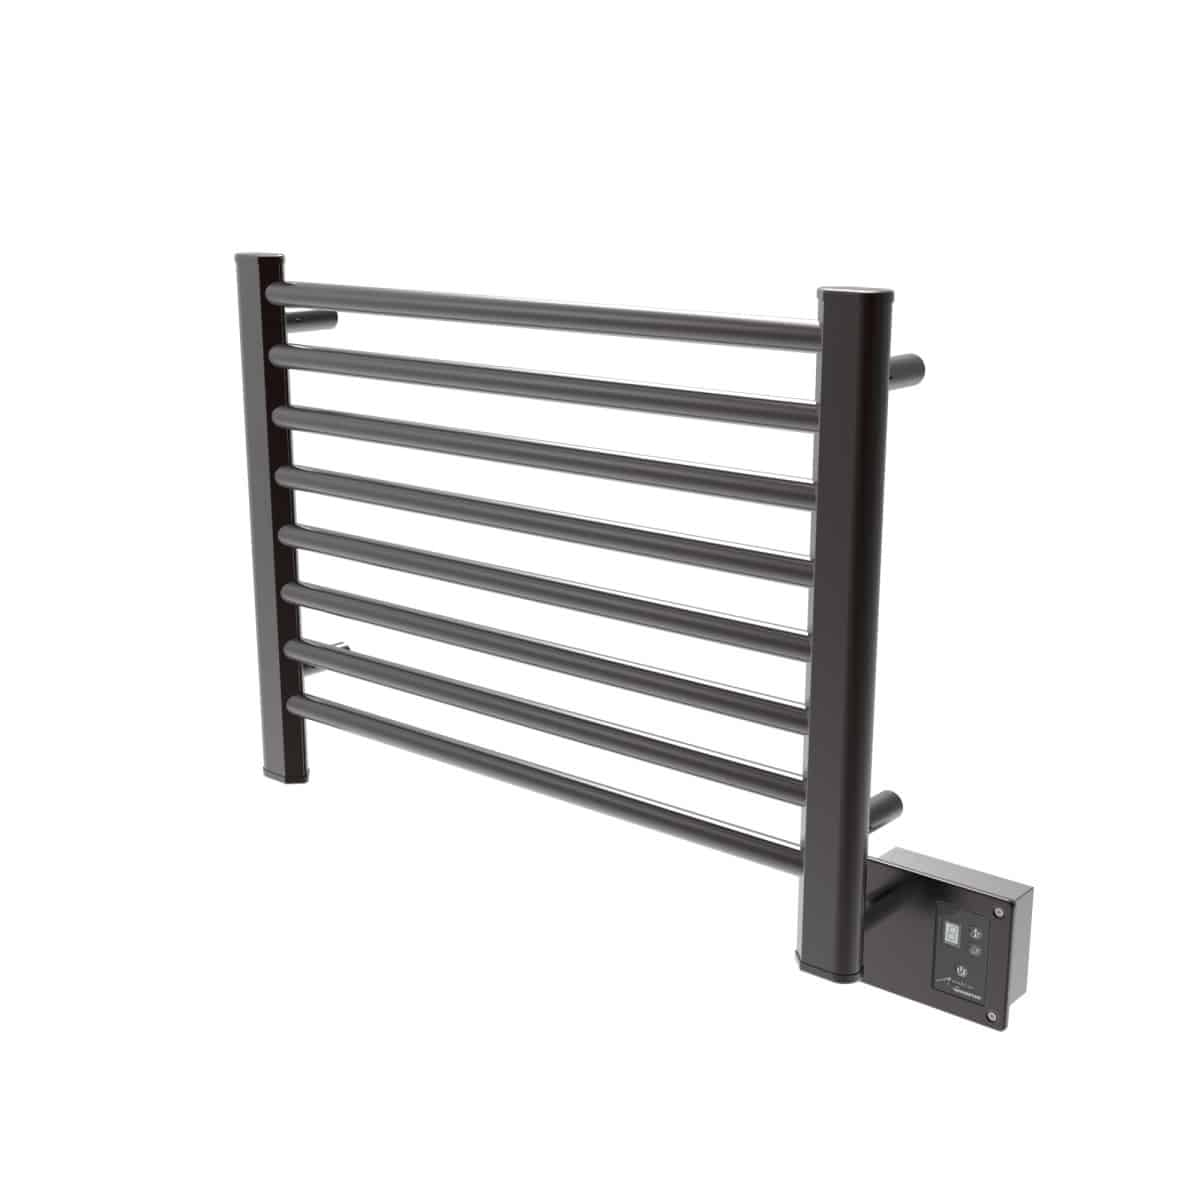 Amba S2921O Model Bar Hardwired Towel Warmer - Oil Rubbed Bronze - Click Image to Close